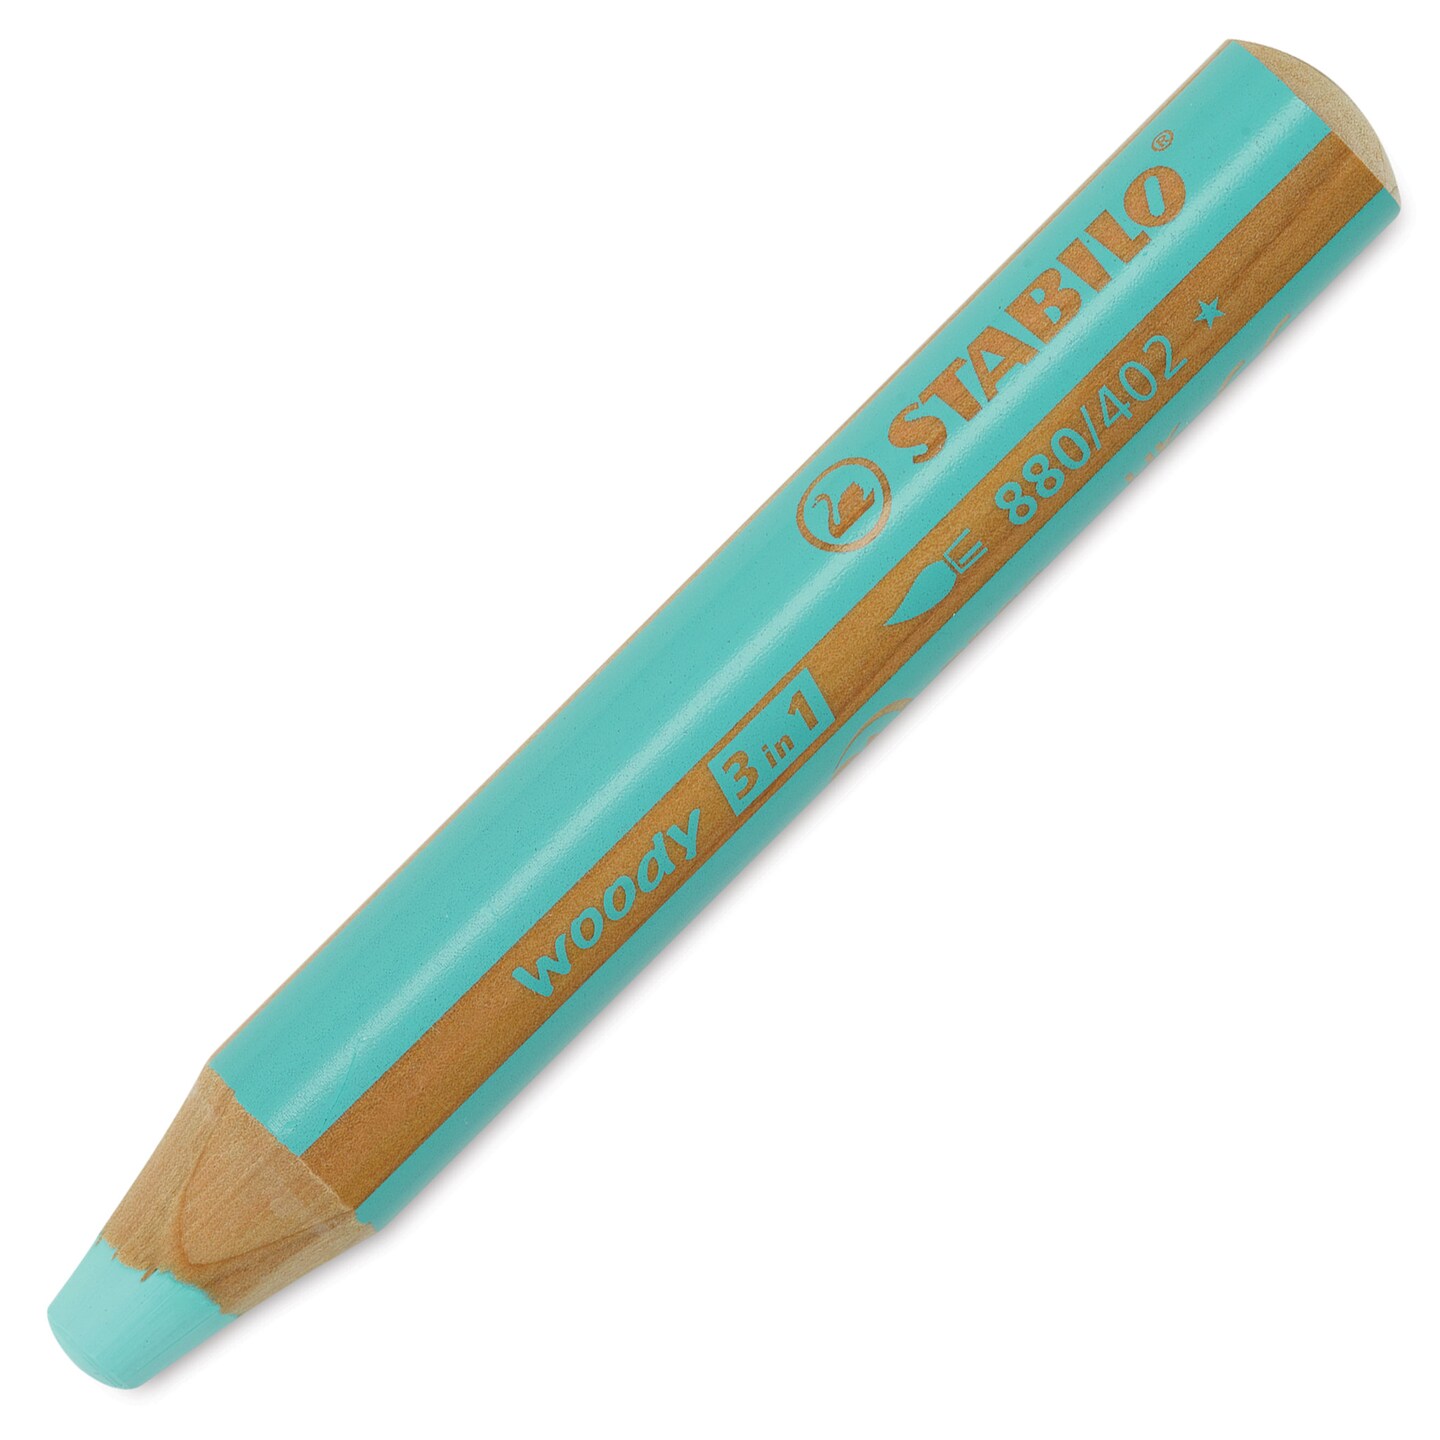 Stabilo Woody 3 in 1 Pencils in Pastels: Watercolor, Pencil and